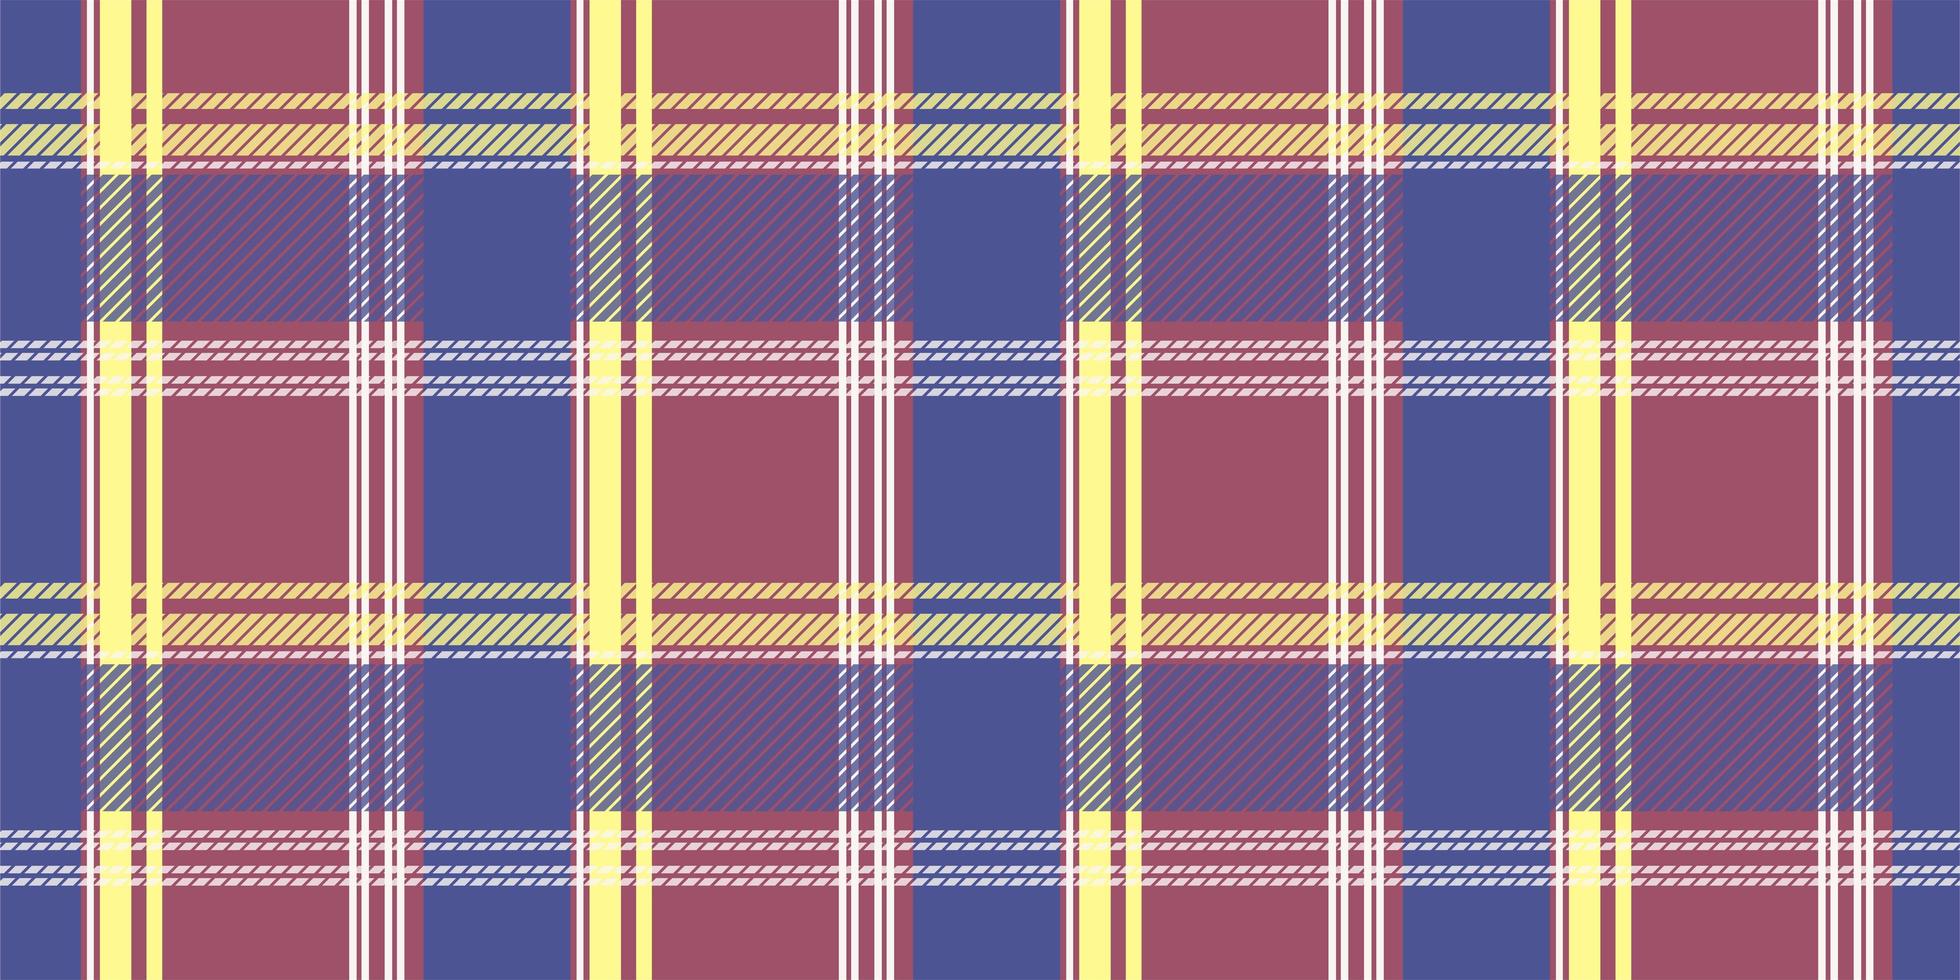 Blue, red and yellow tartan plaid seamless pattern vector